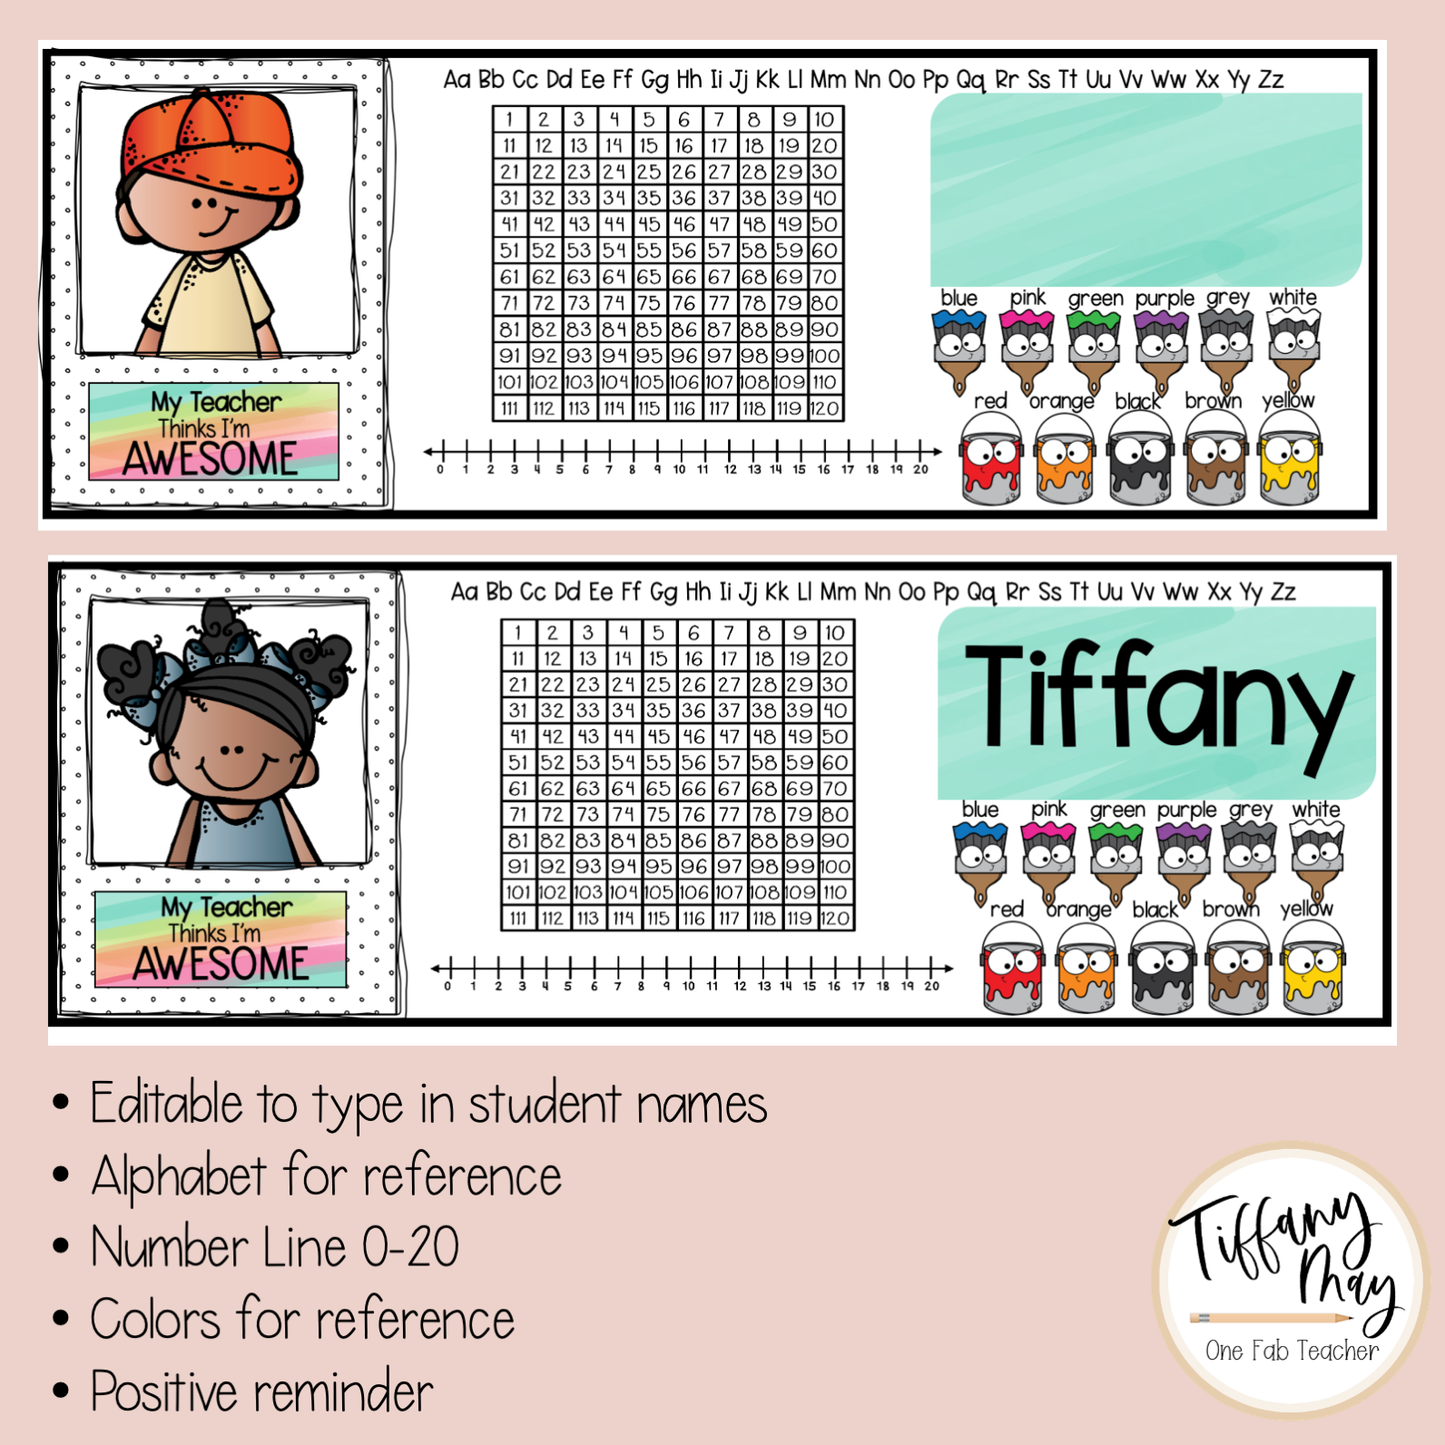 Happy Bright Desk Name Tags for Engaged Students | Customizable